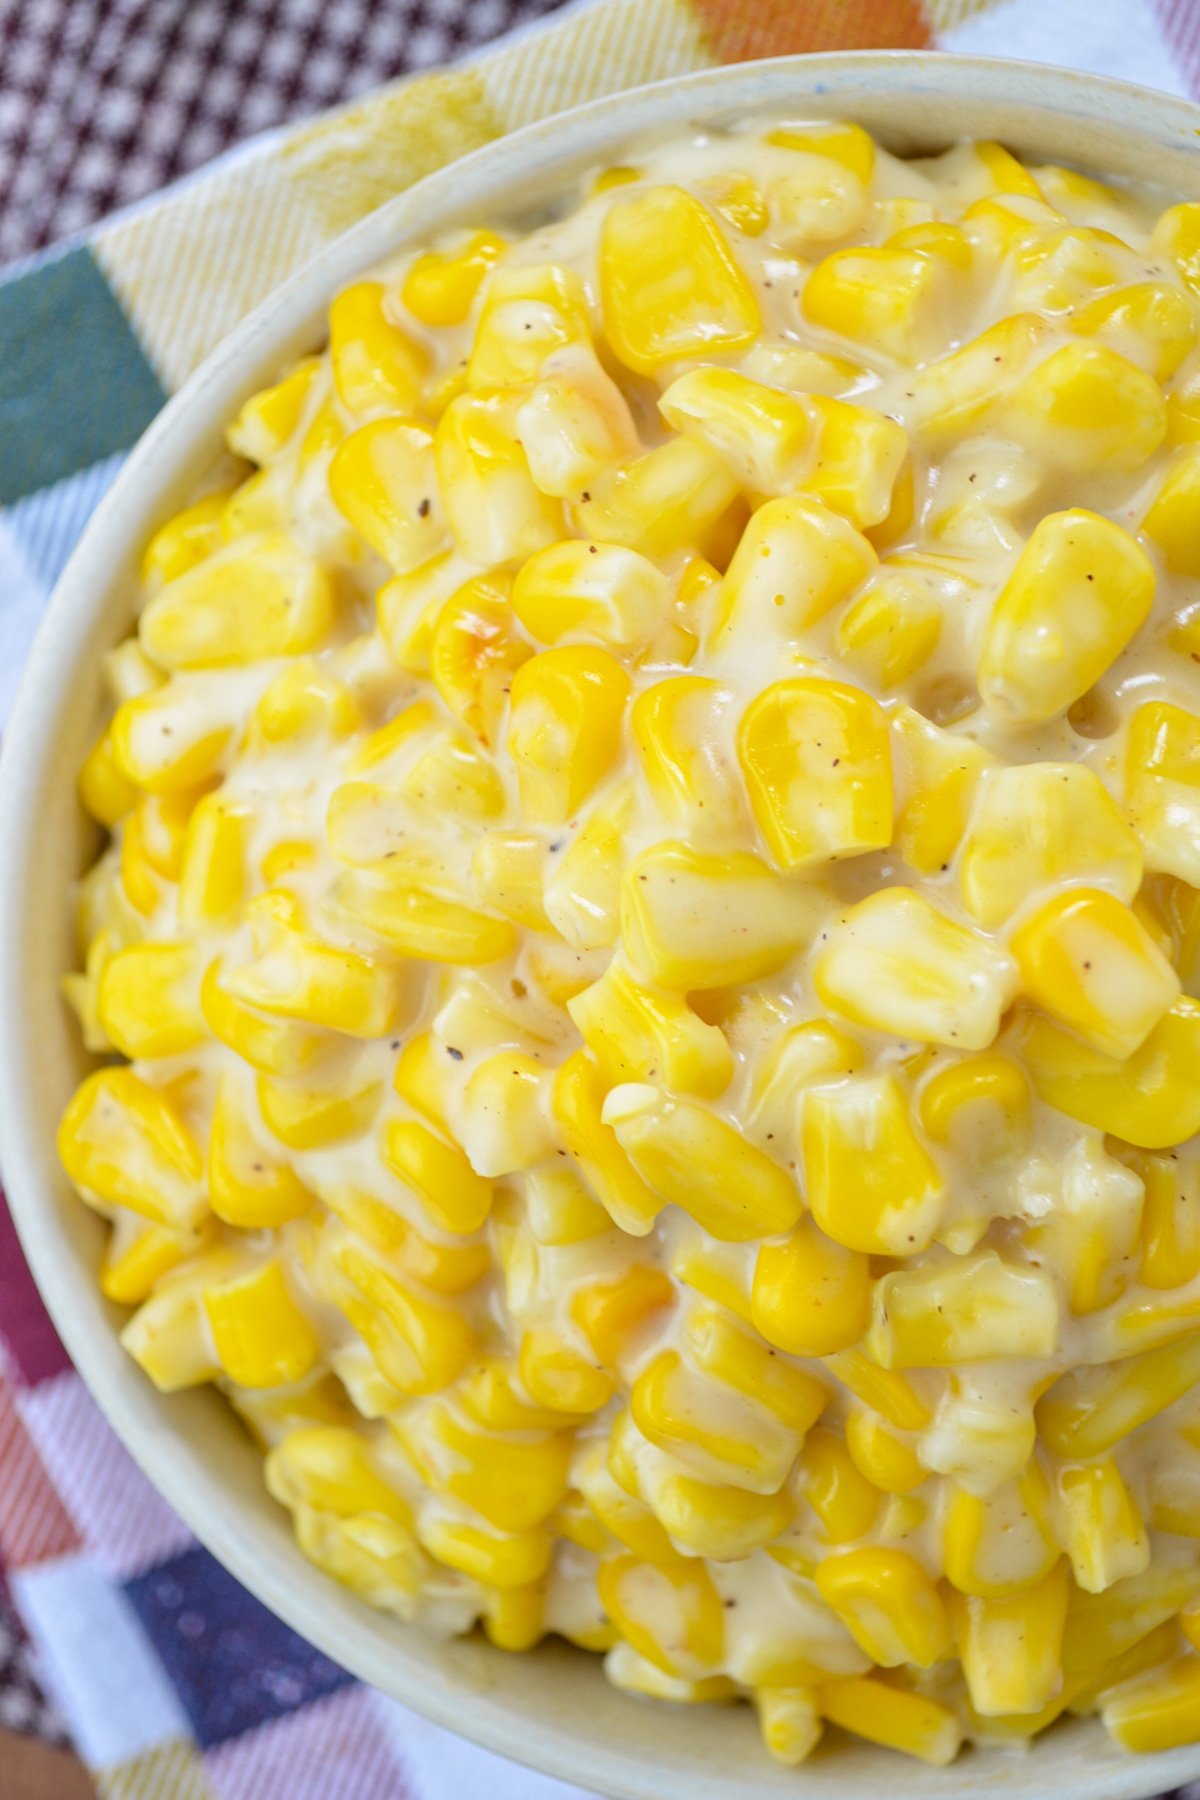 A close up of a bowl of creamed corn.